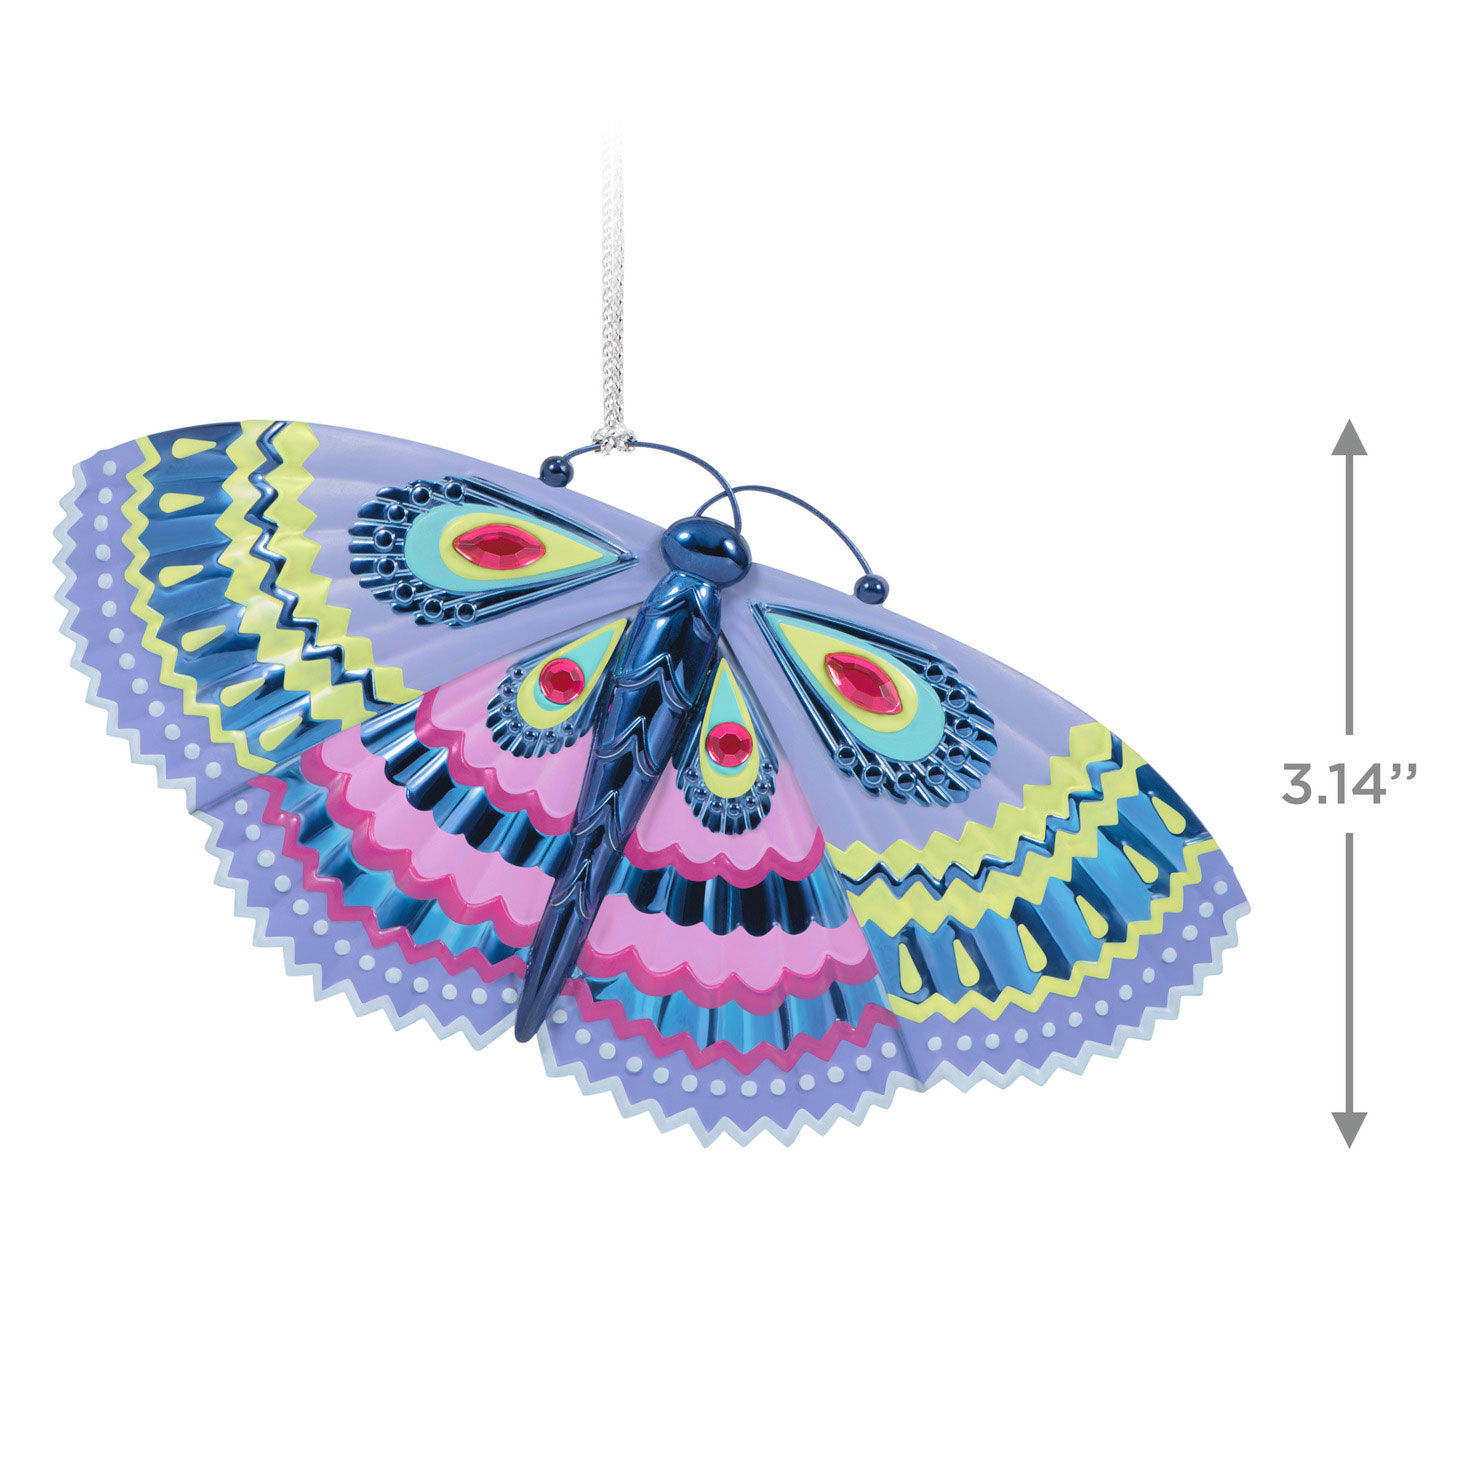 Brilliant Butterflies Ornament for only USD 17.99 | Hallmark